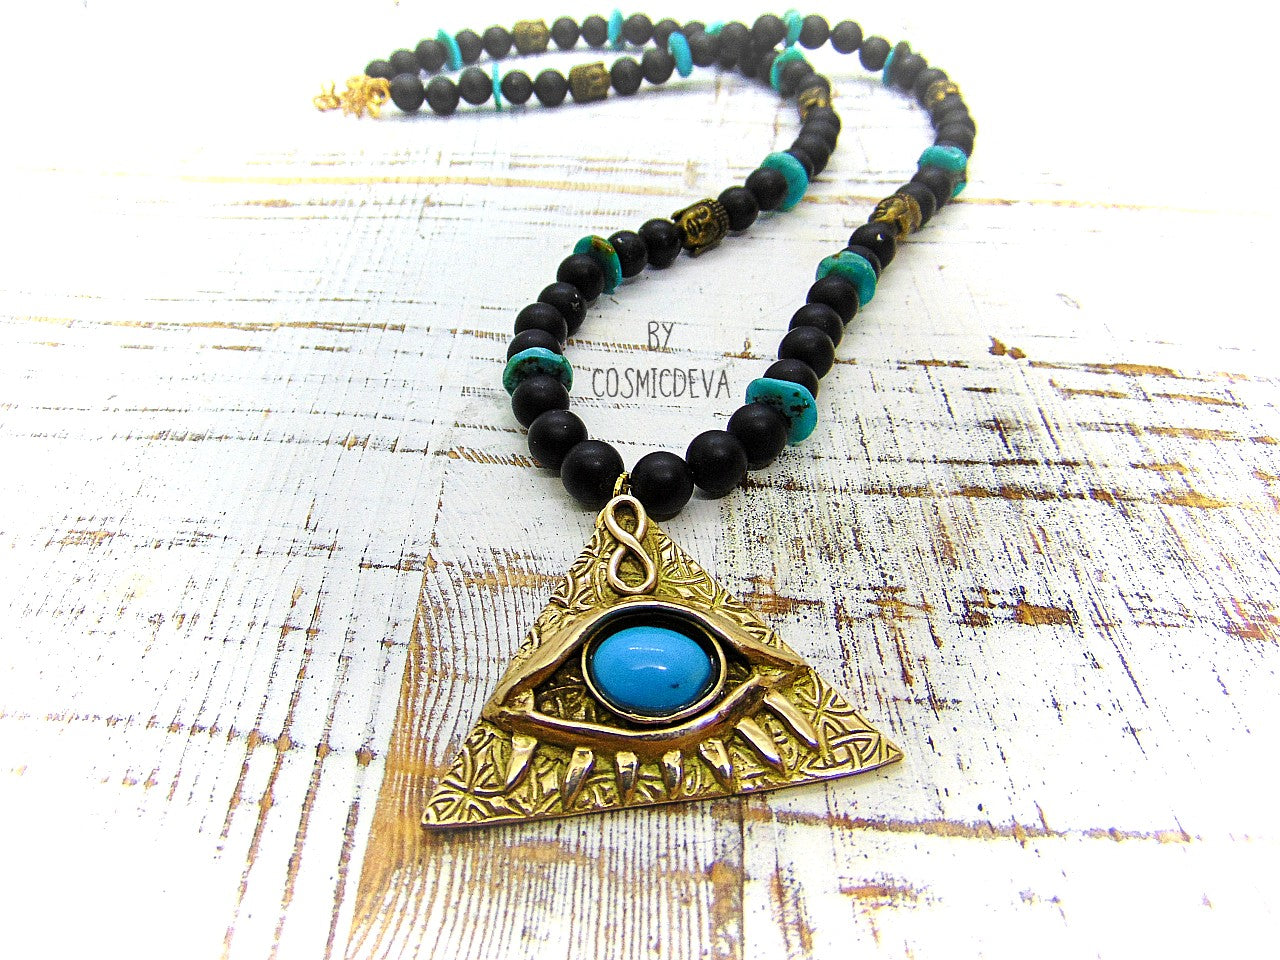 Adorn yourself with this mystical completely hand sculptured bronze All Seeing Eye necklace and protect your soul with its natural turquoise and black onyx gemstones. Feel the spiritual energy of its Infinity symbol and antique brass buddha head beads, inspiring knowledge and positivity. Experience the power of the eye each time you wear it!